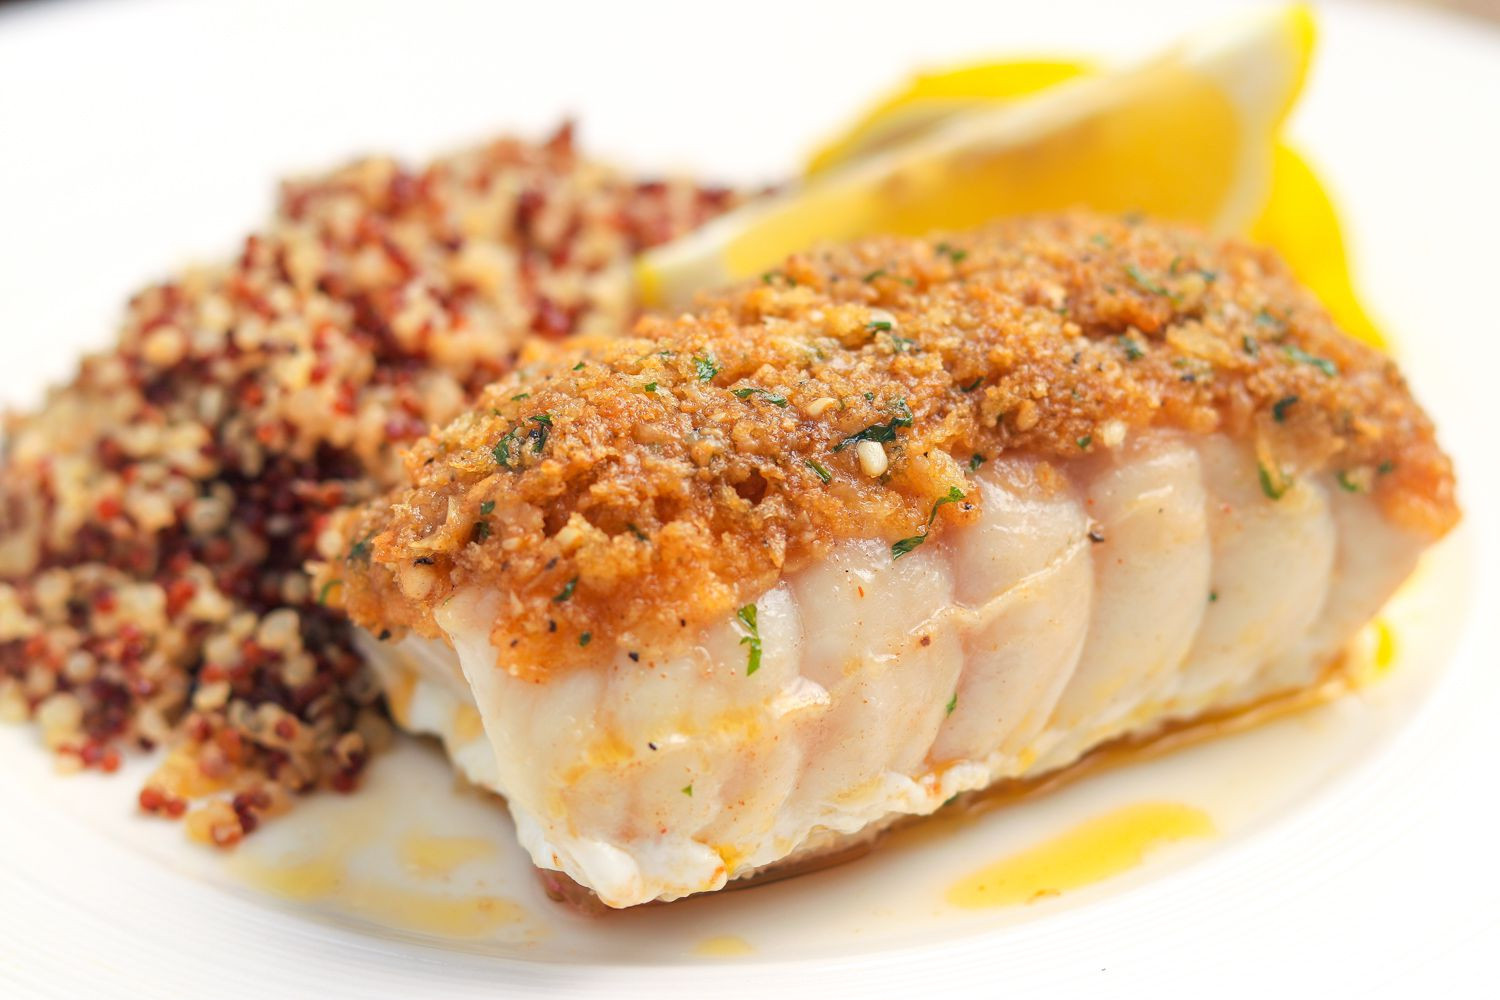 Red Snapper Fish Recipes
 Baked Red Snapper With Garlic and Herbs Recipe